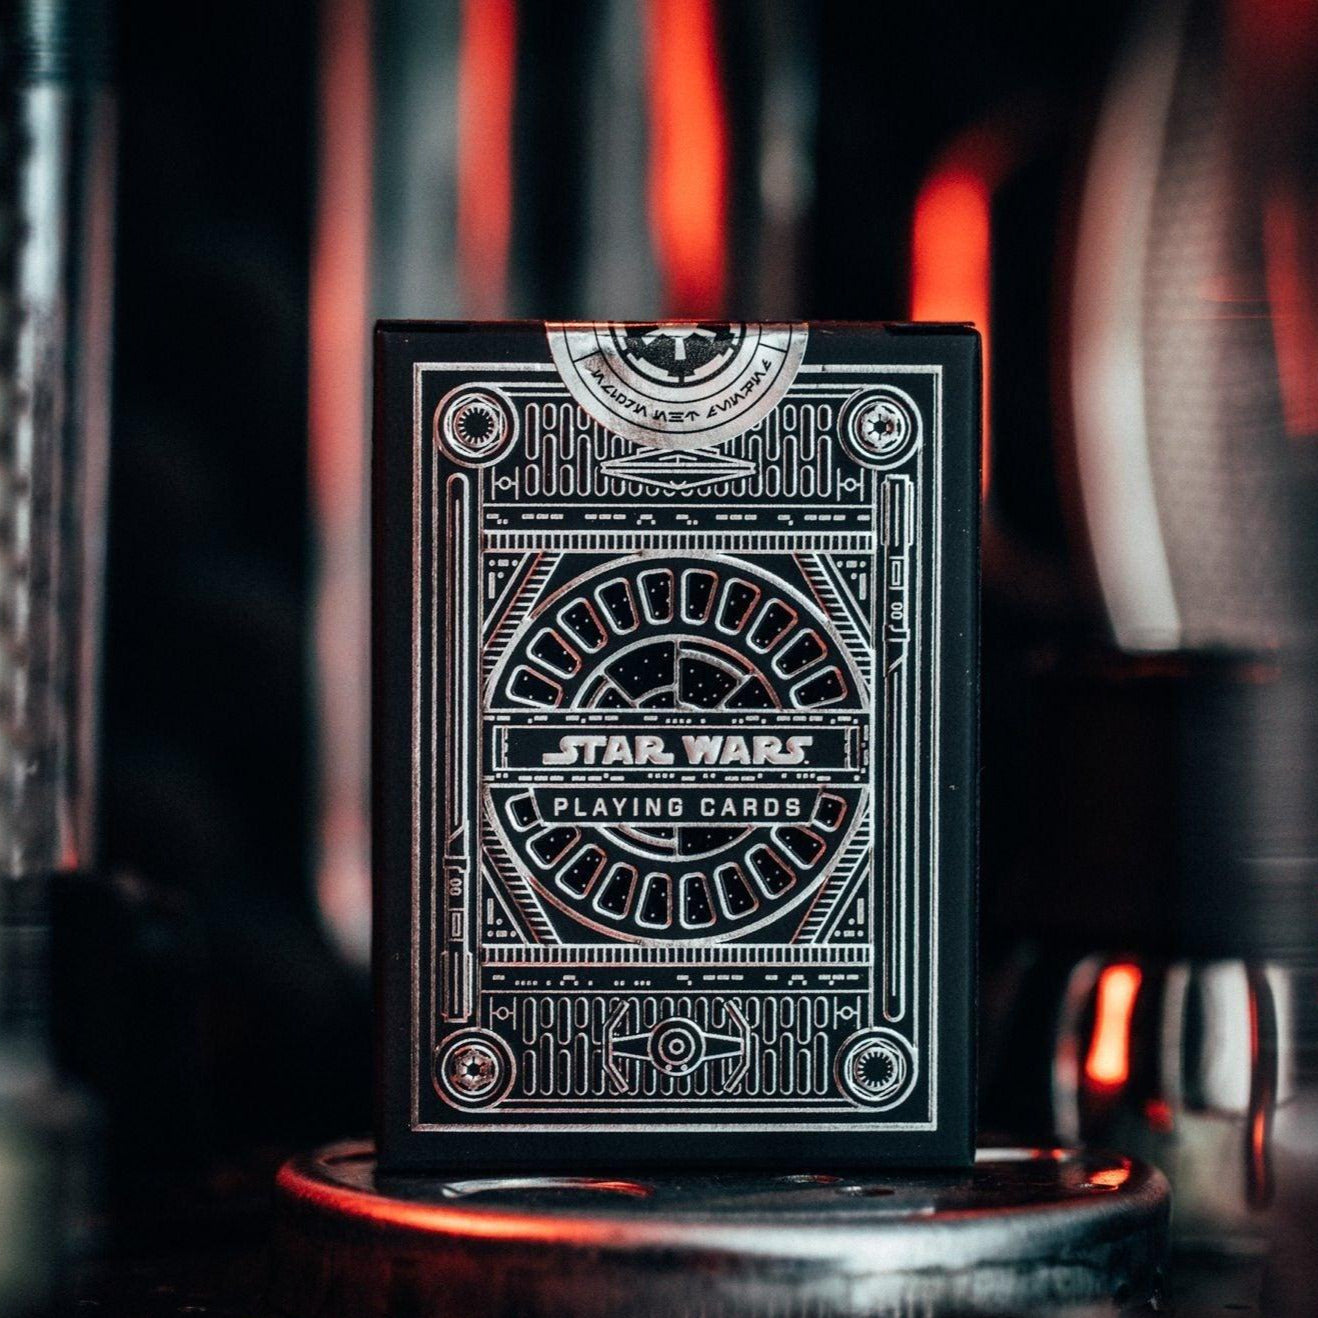 Star Wars Playing Cards Black Edition by Theory 11 –